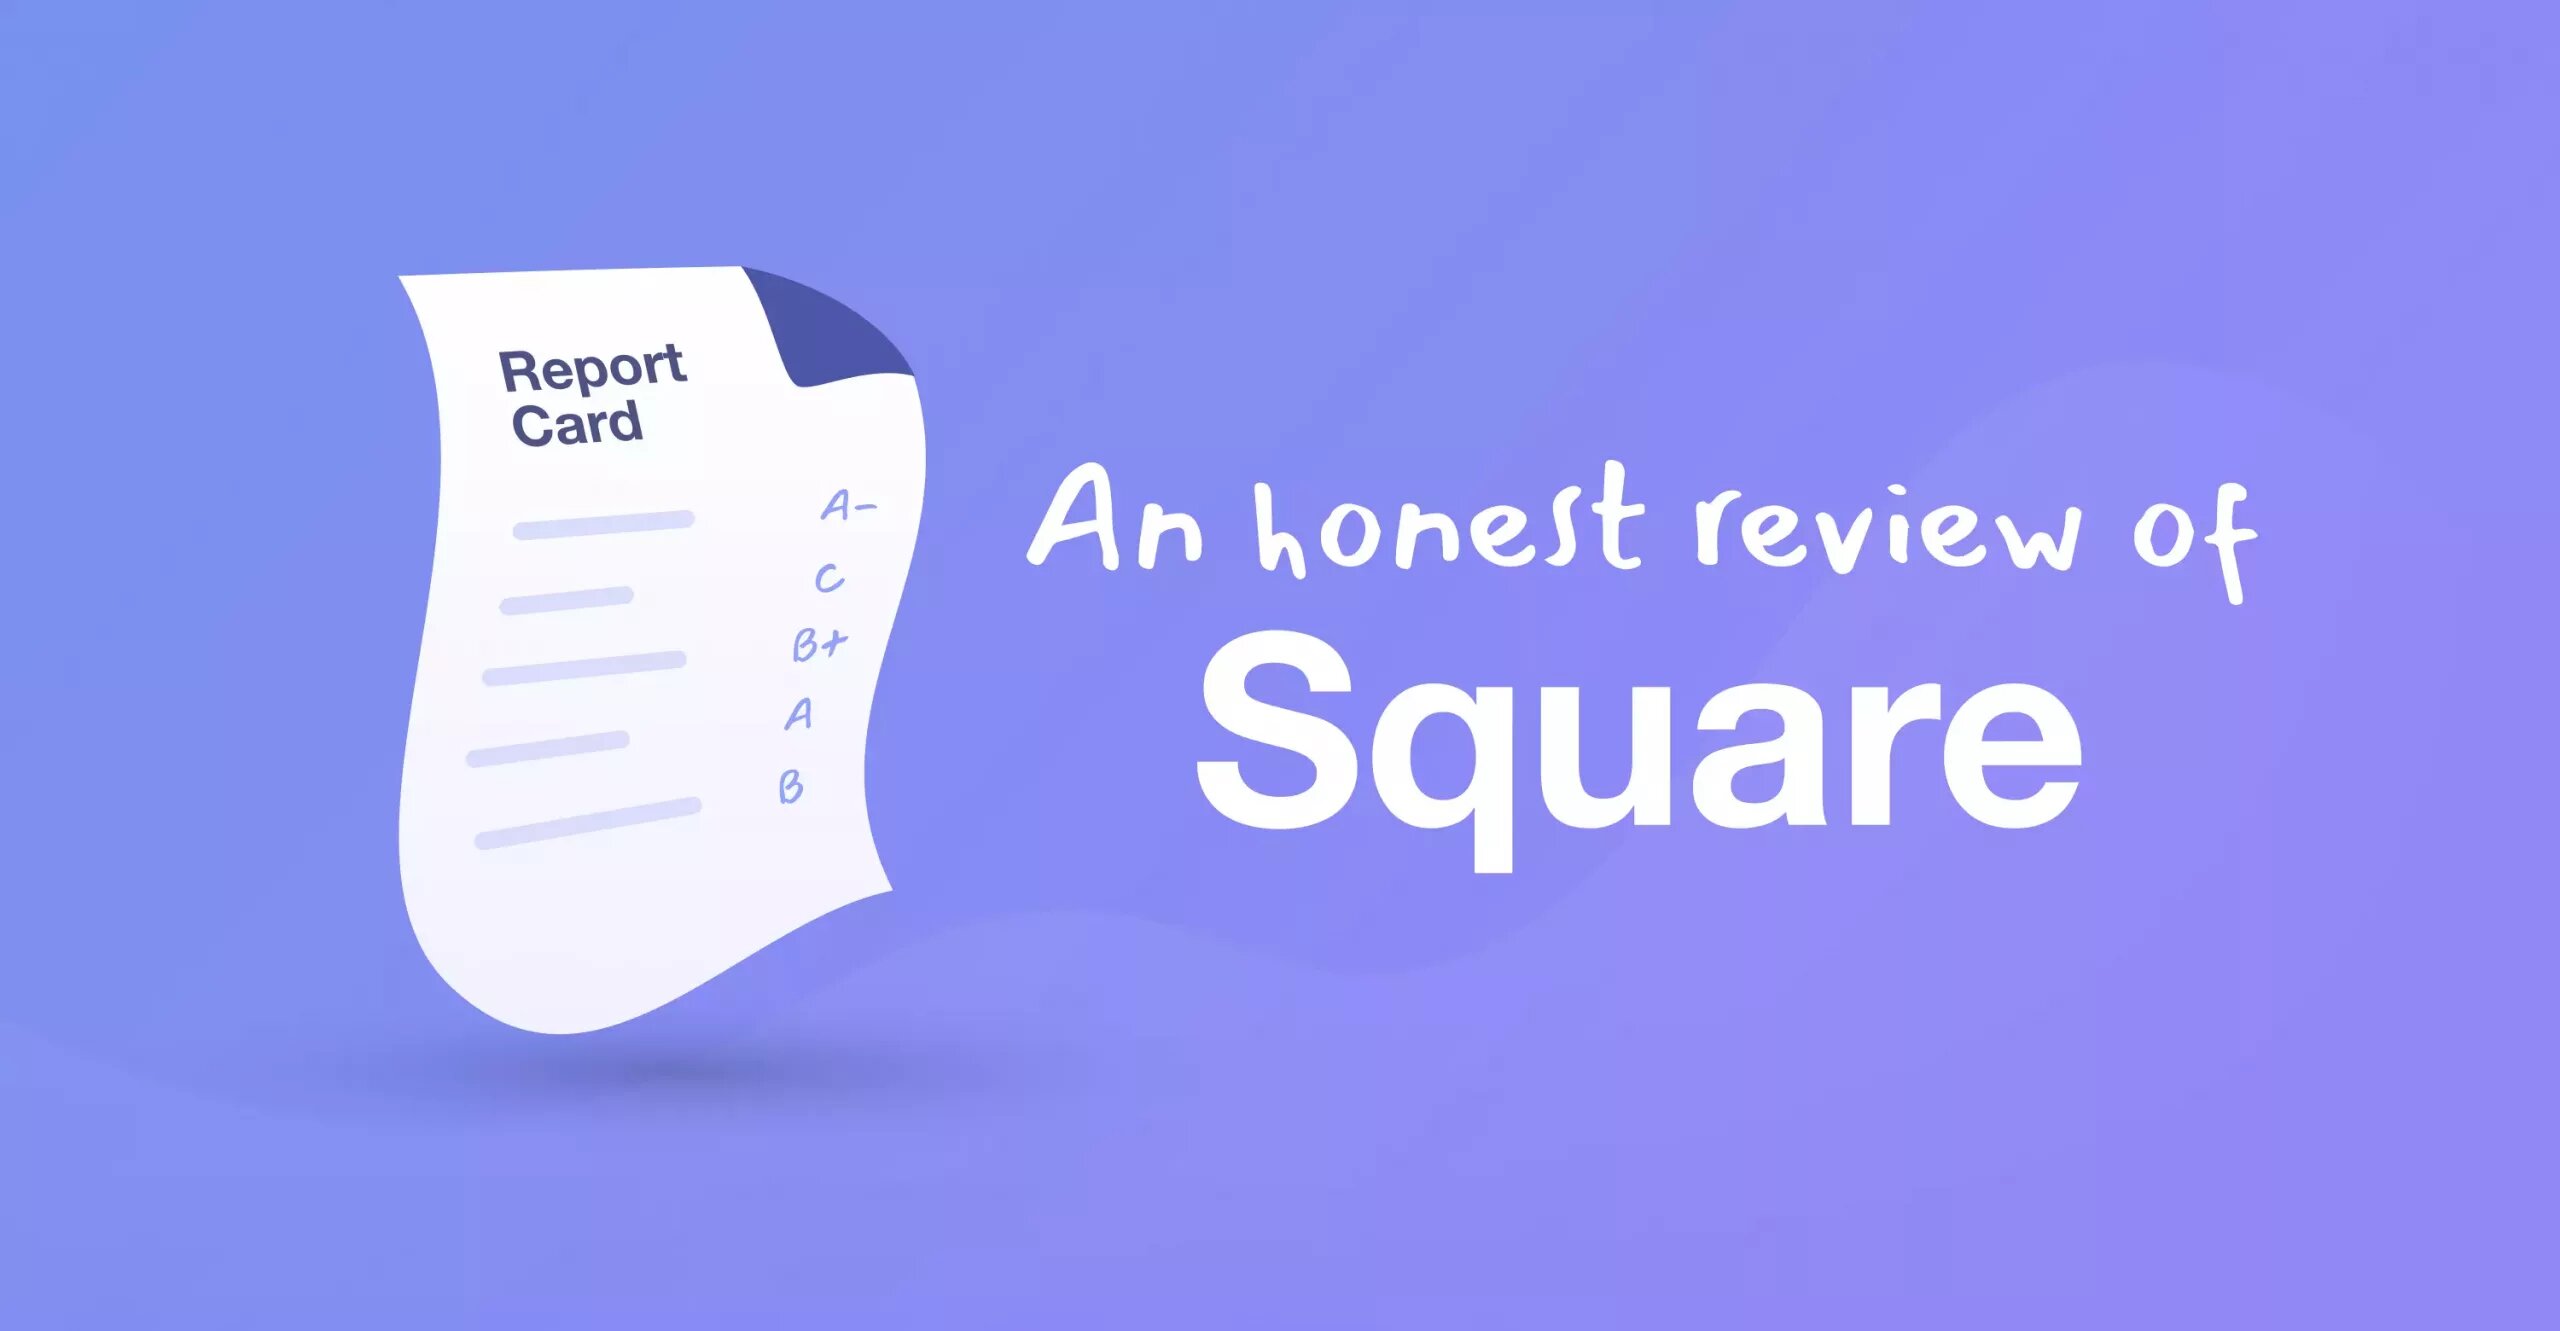 credit card report letter and an honest review of square as title